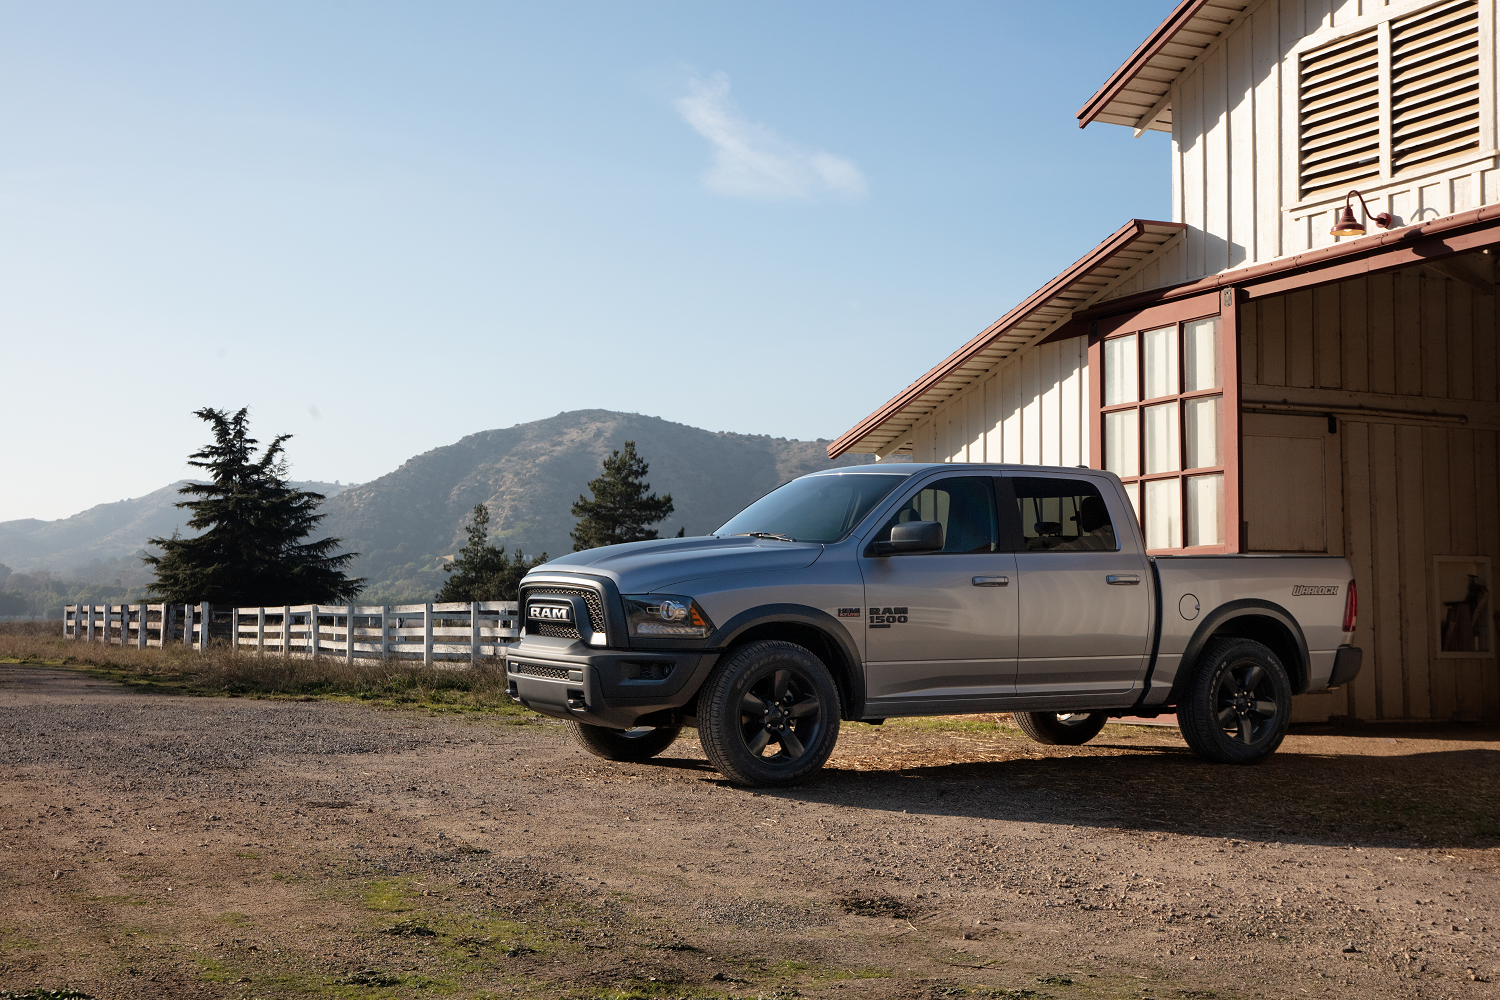 Ram 1500s available in Wilkesboro, NC at Randy Marion Chrysler Dodge Jeep Ram